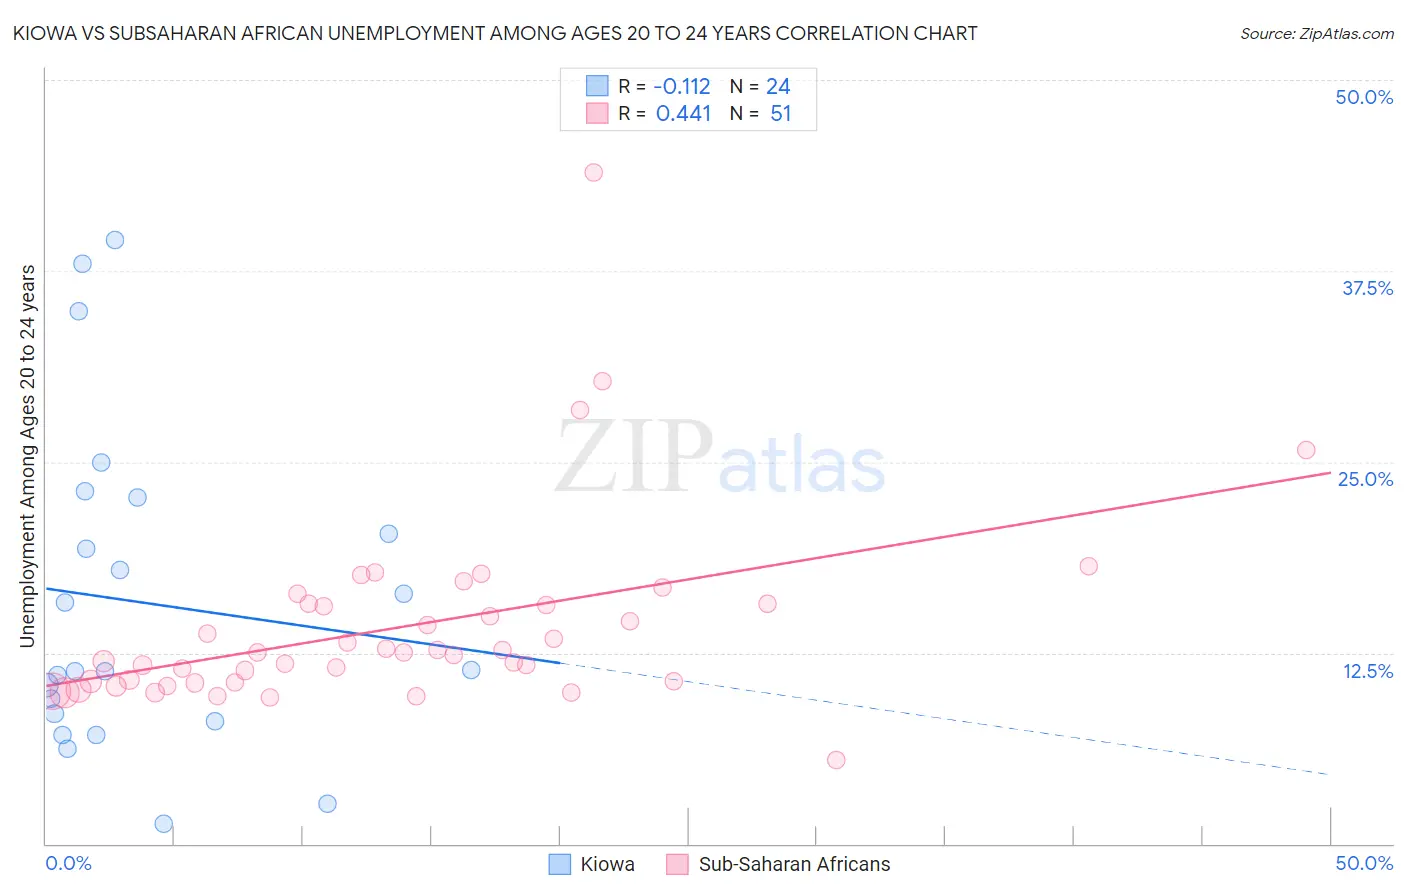 Kiowa vs Subsaharan African Unemployment Among Ages 20 to 24 years